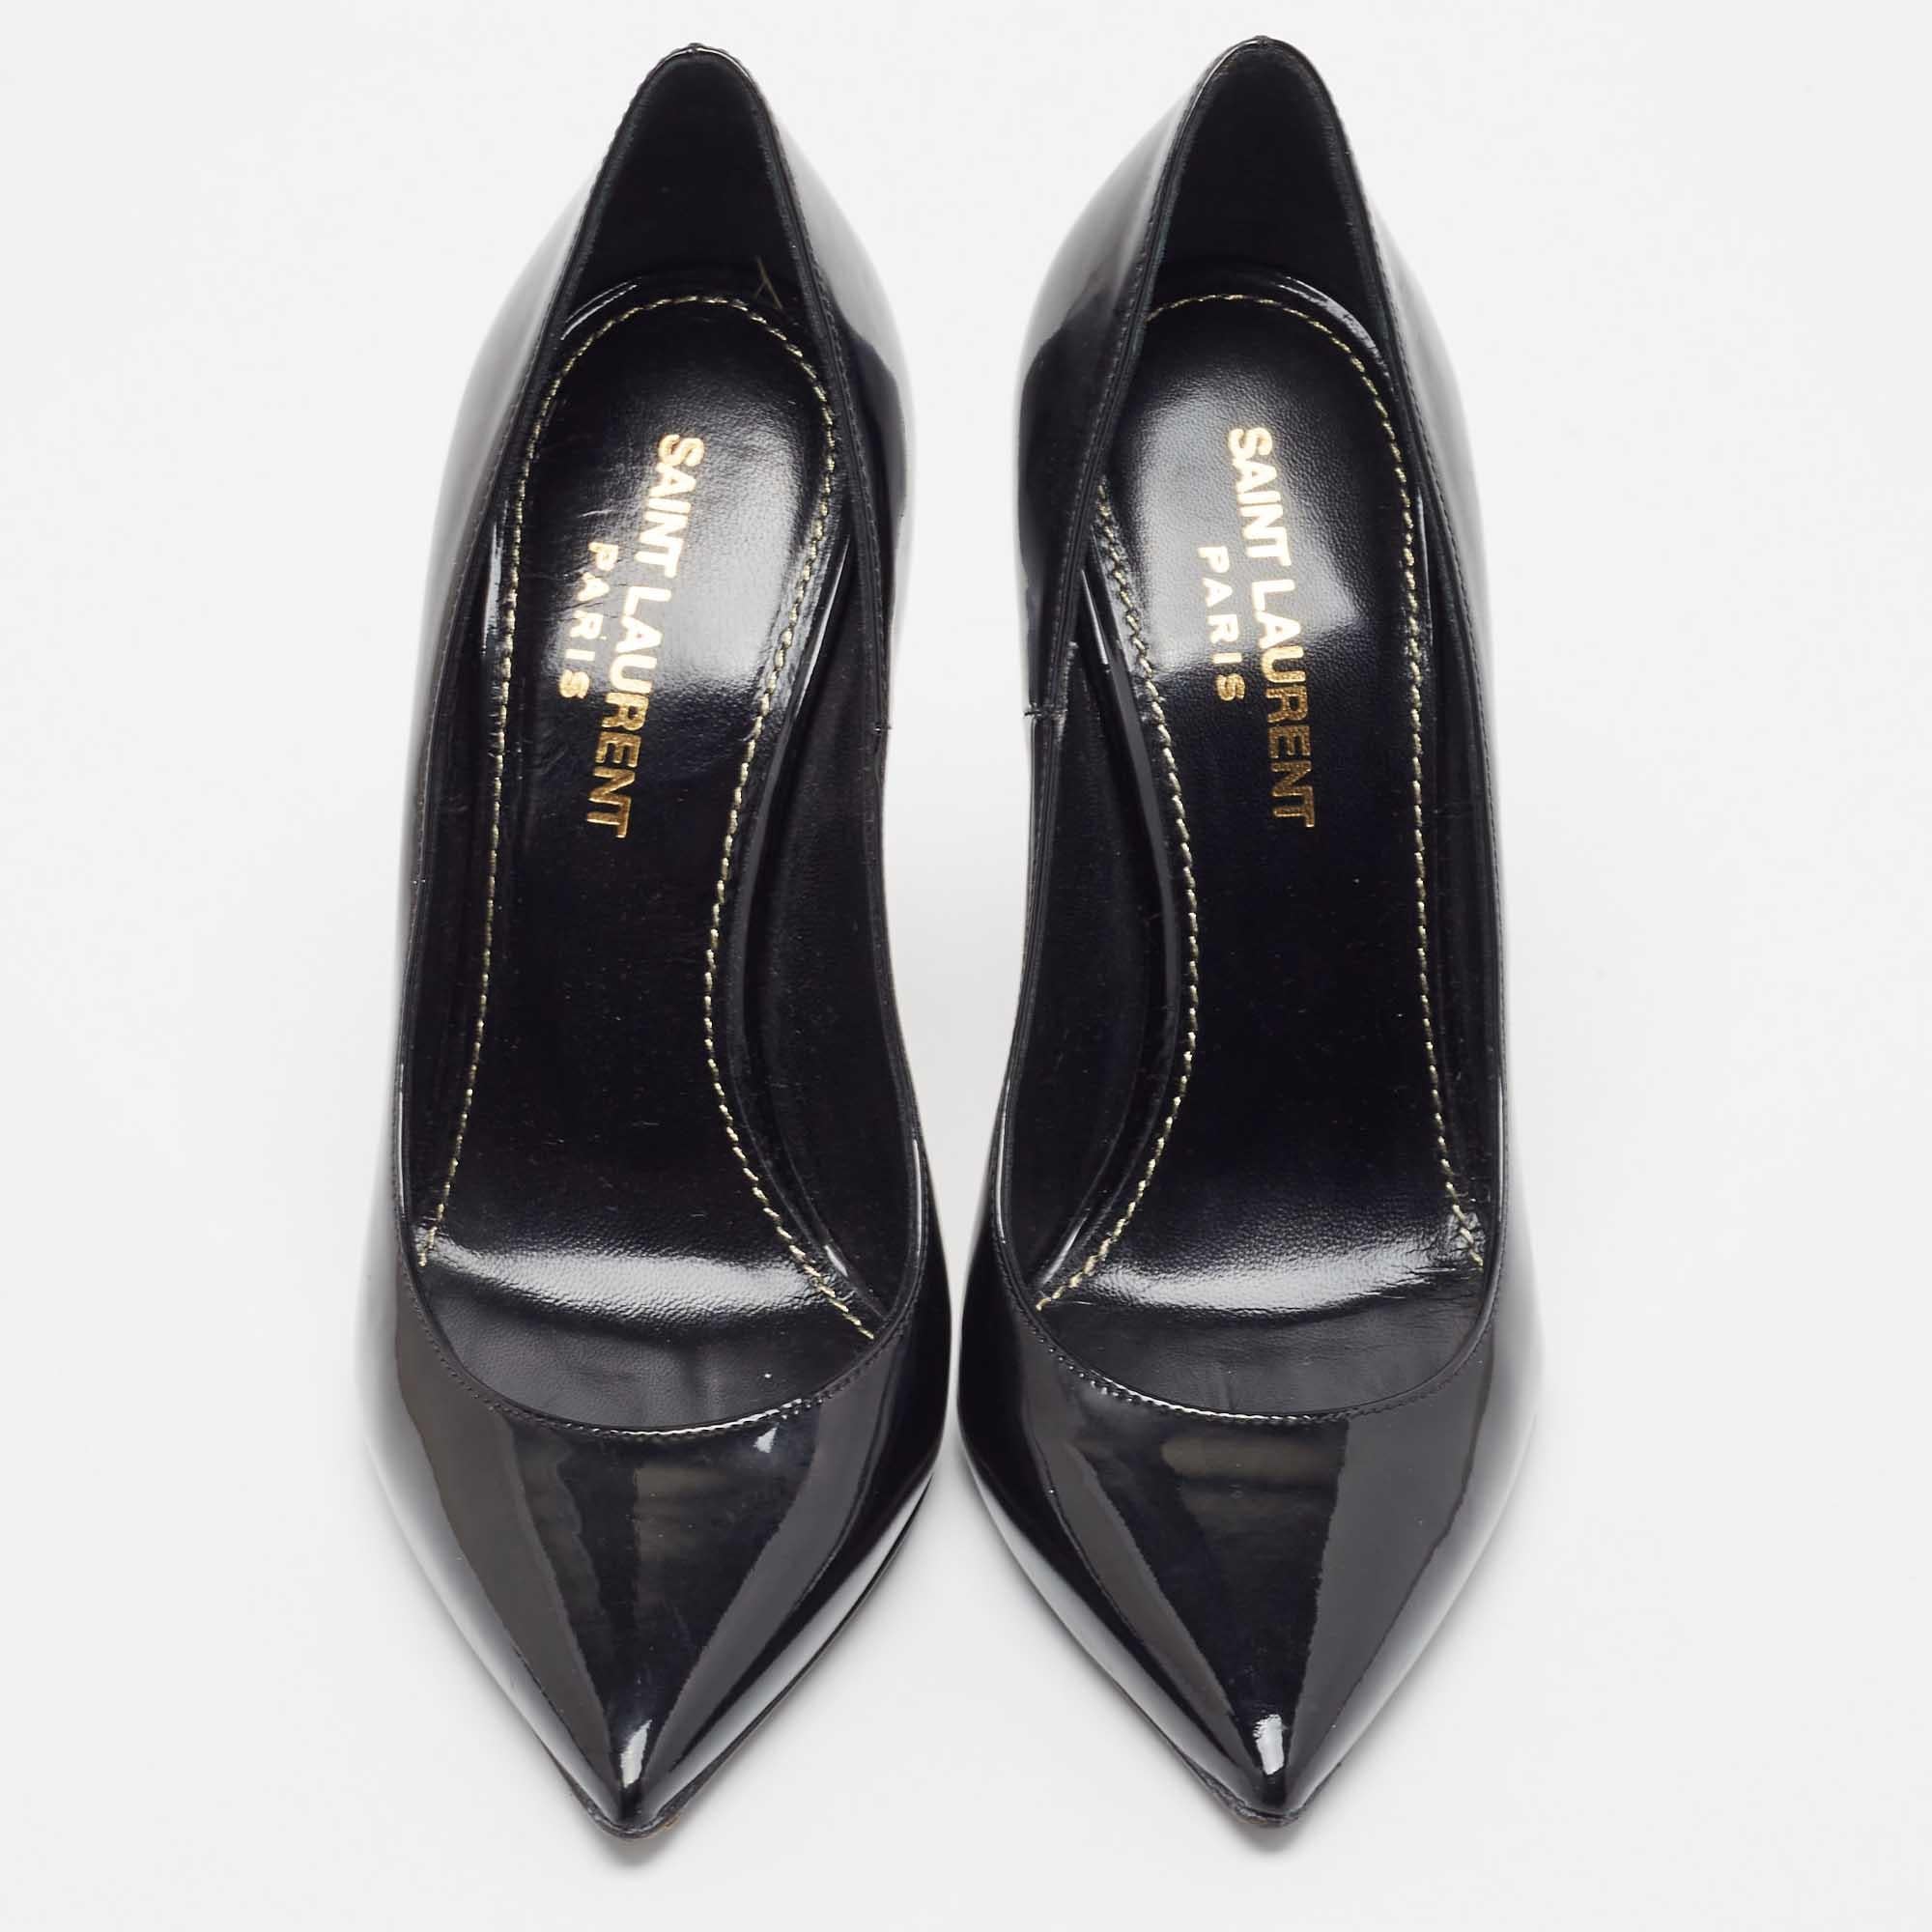 The fashion house’s tradition of excellence, coupled with modern design sensibilities, works to make these YSL pumps a fabulous choice. They'll help you deliver a chic look with ease.

